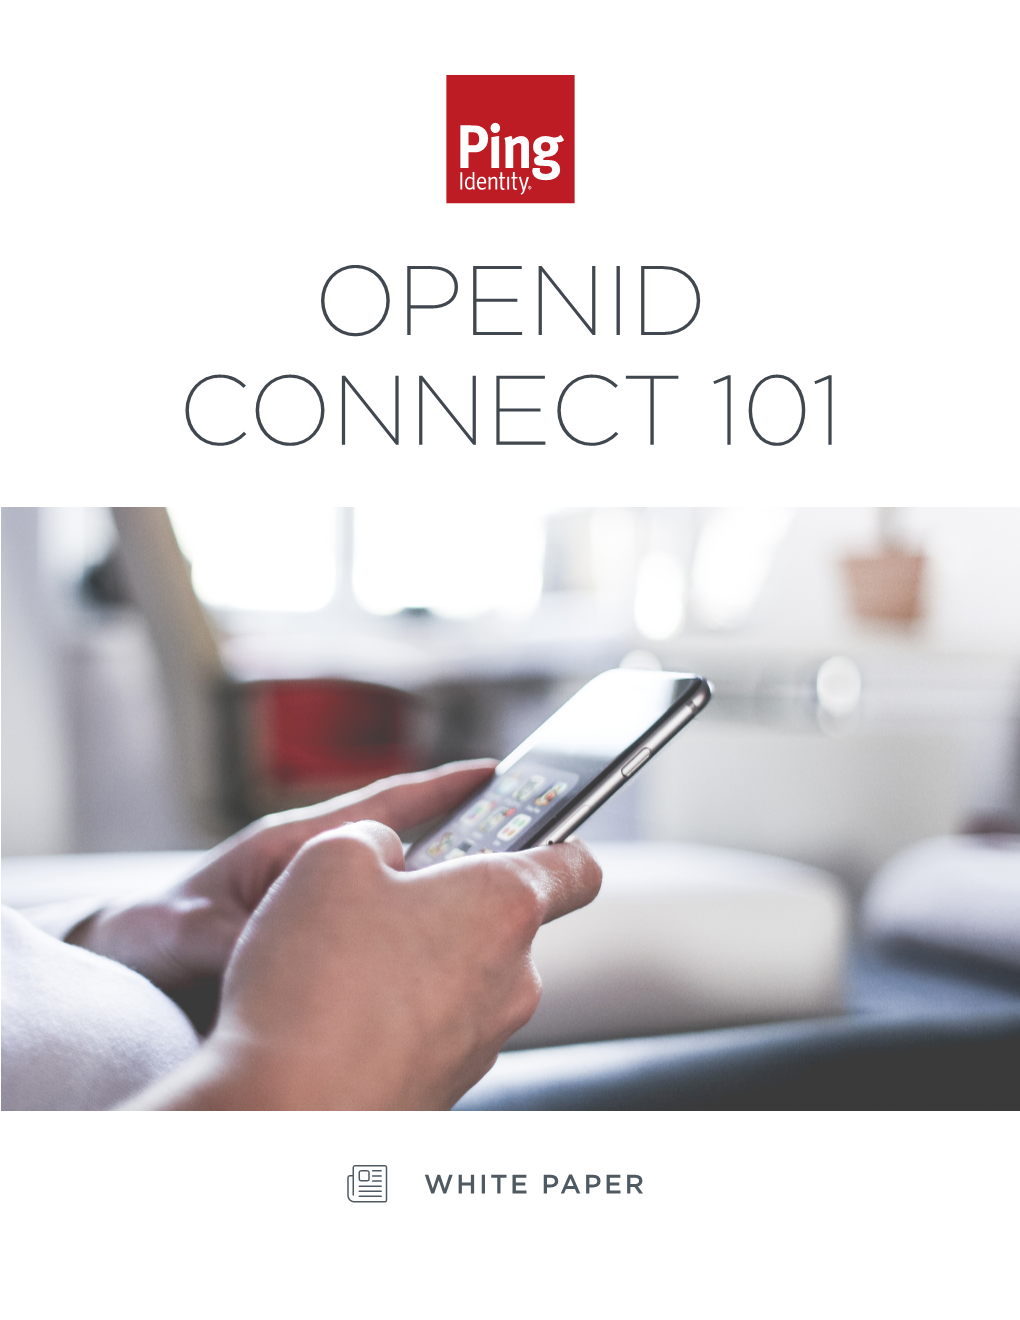 Openid Connect 101